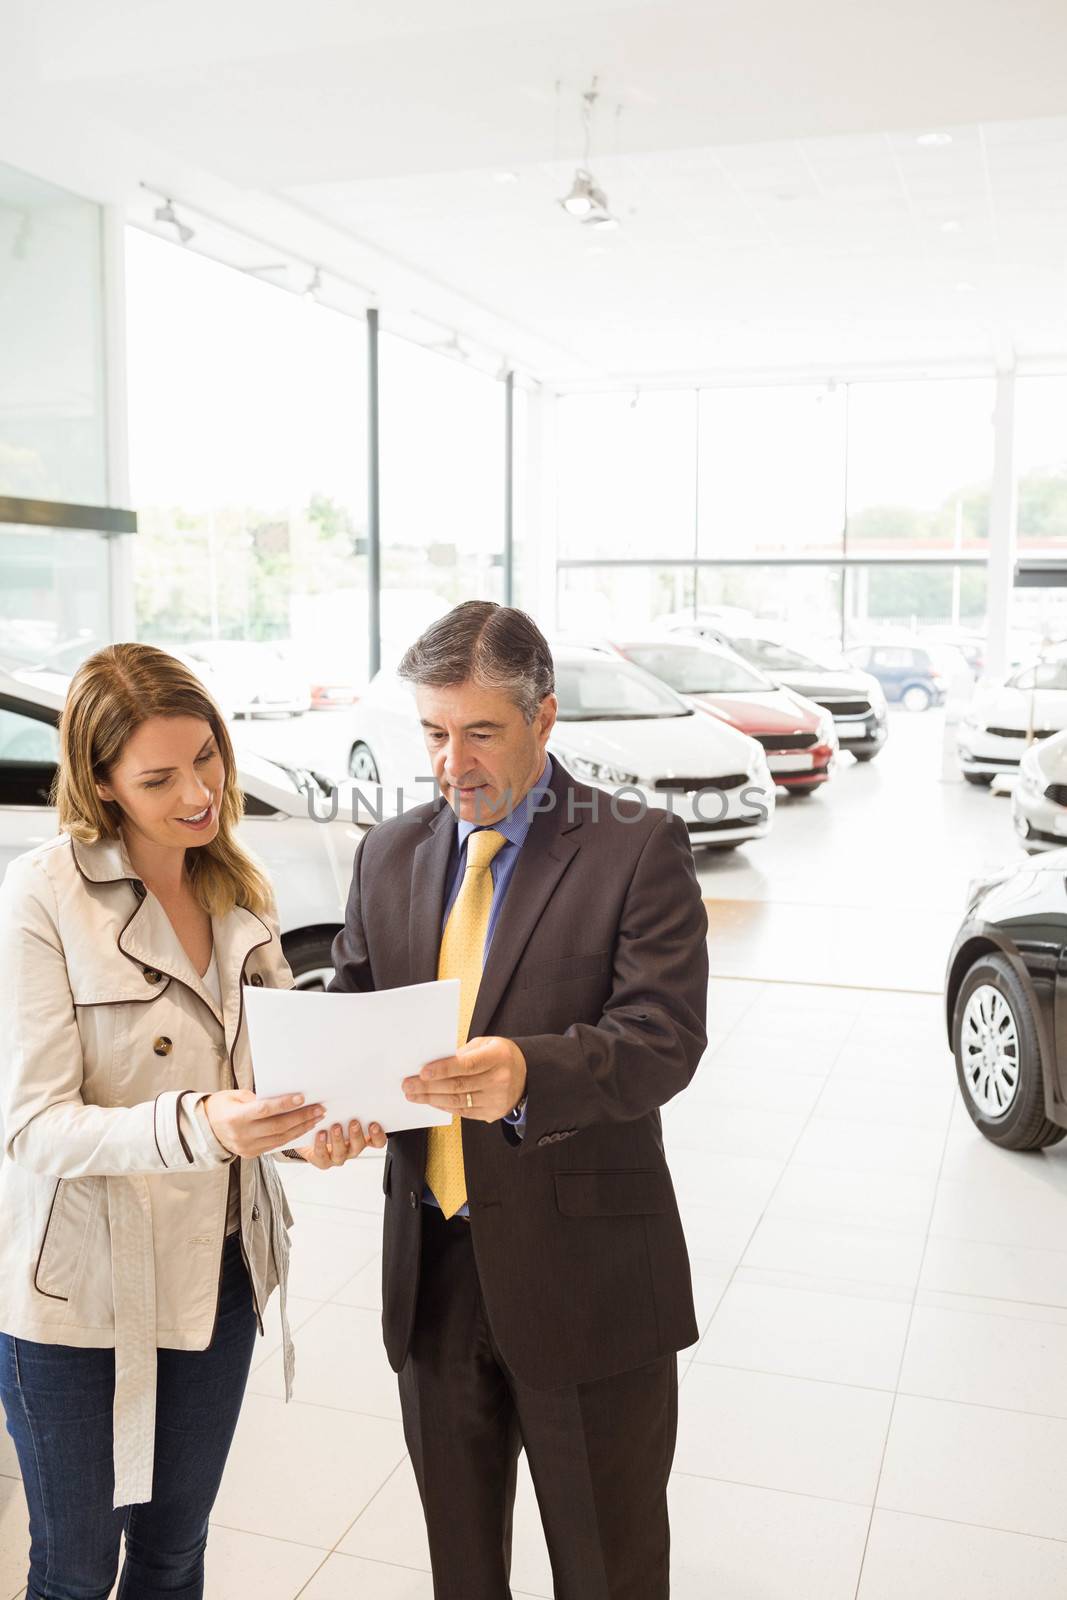 Salesman explaining the contract to a client at new car showroom